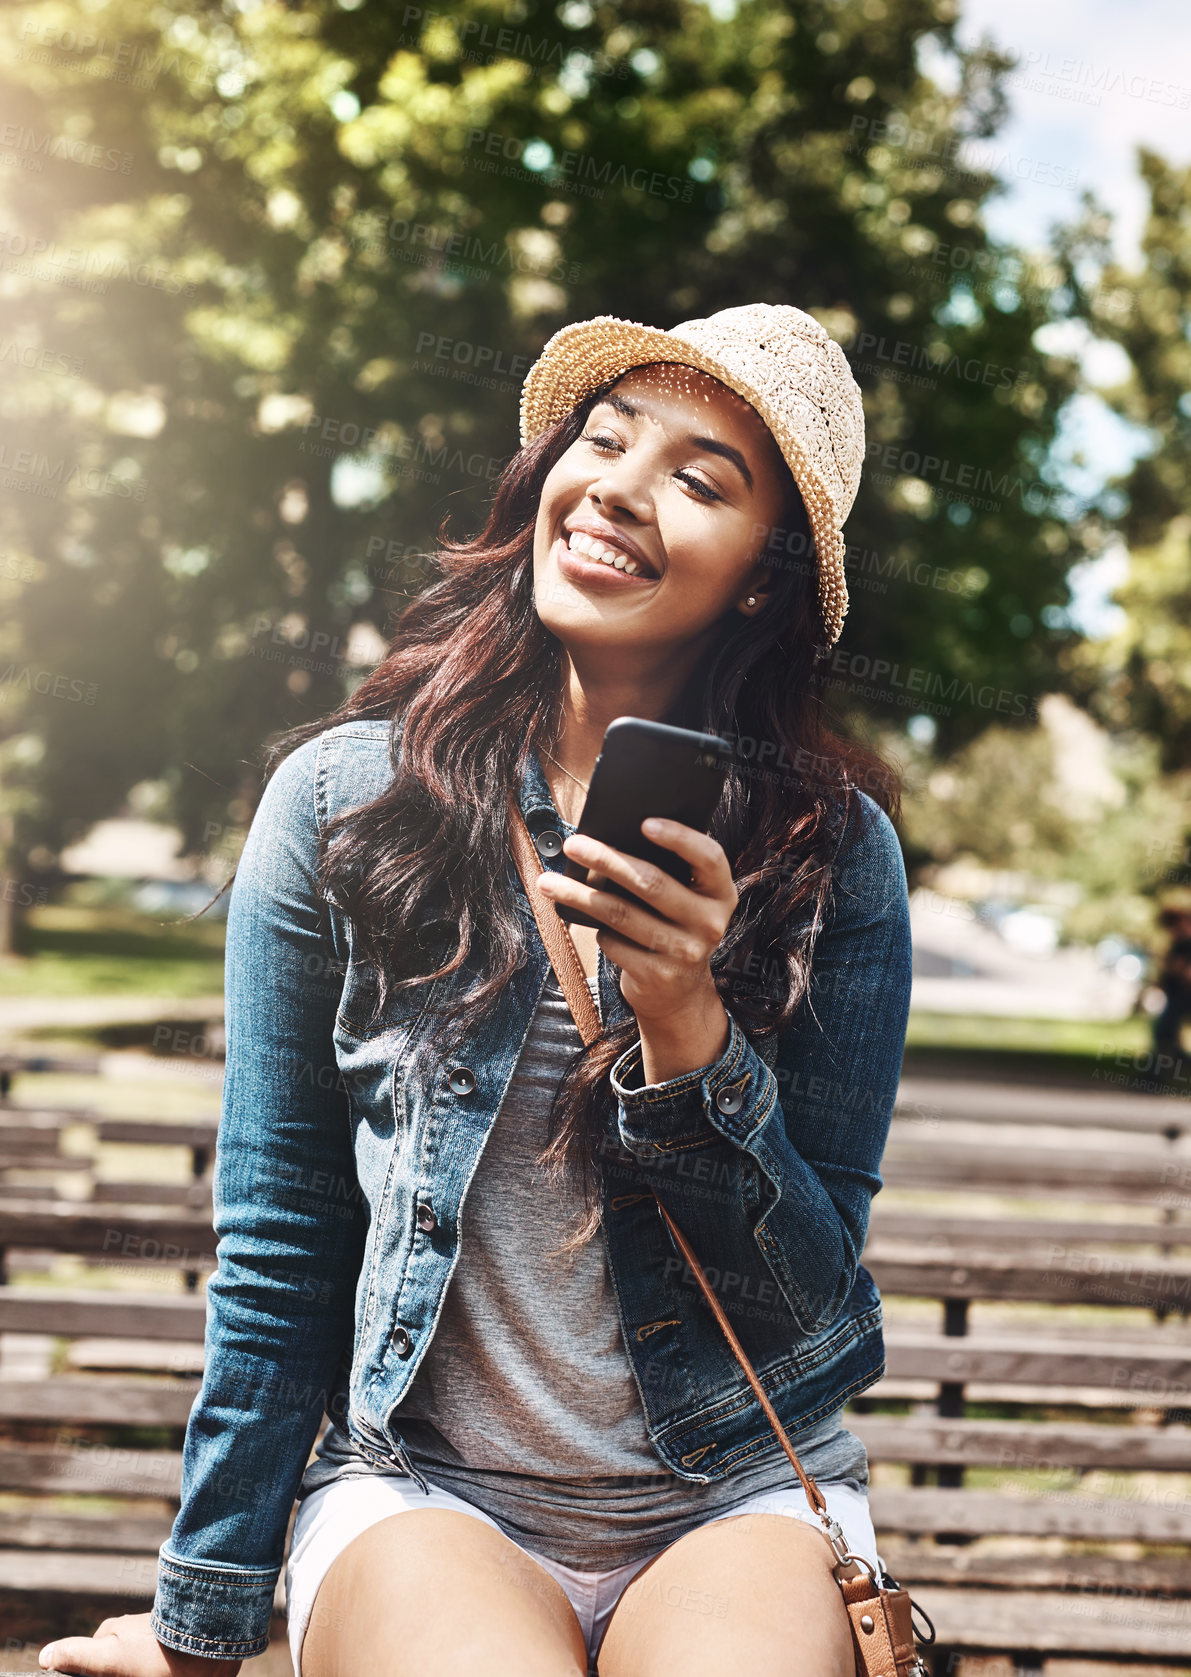 Buy stock photo Shot of an attractive young woman using a cellphone at the park